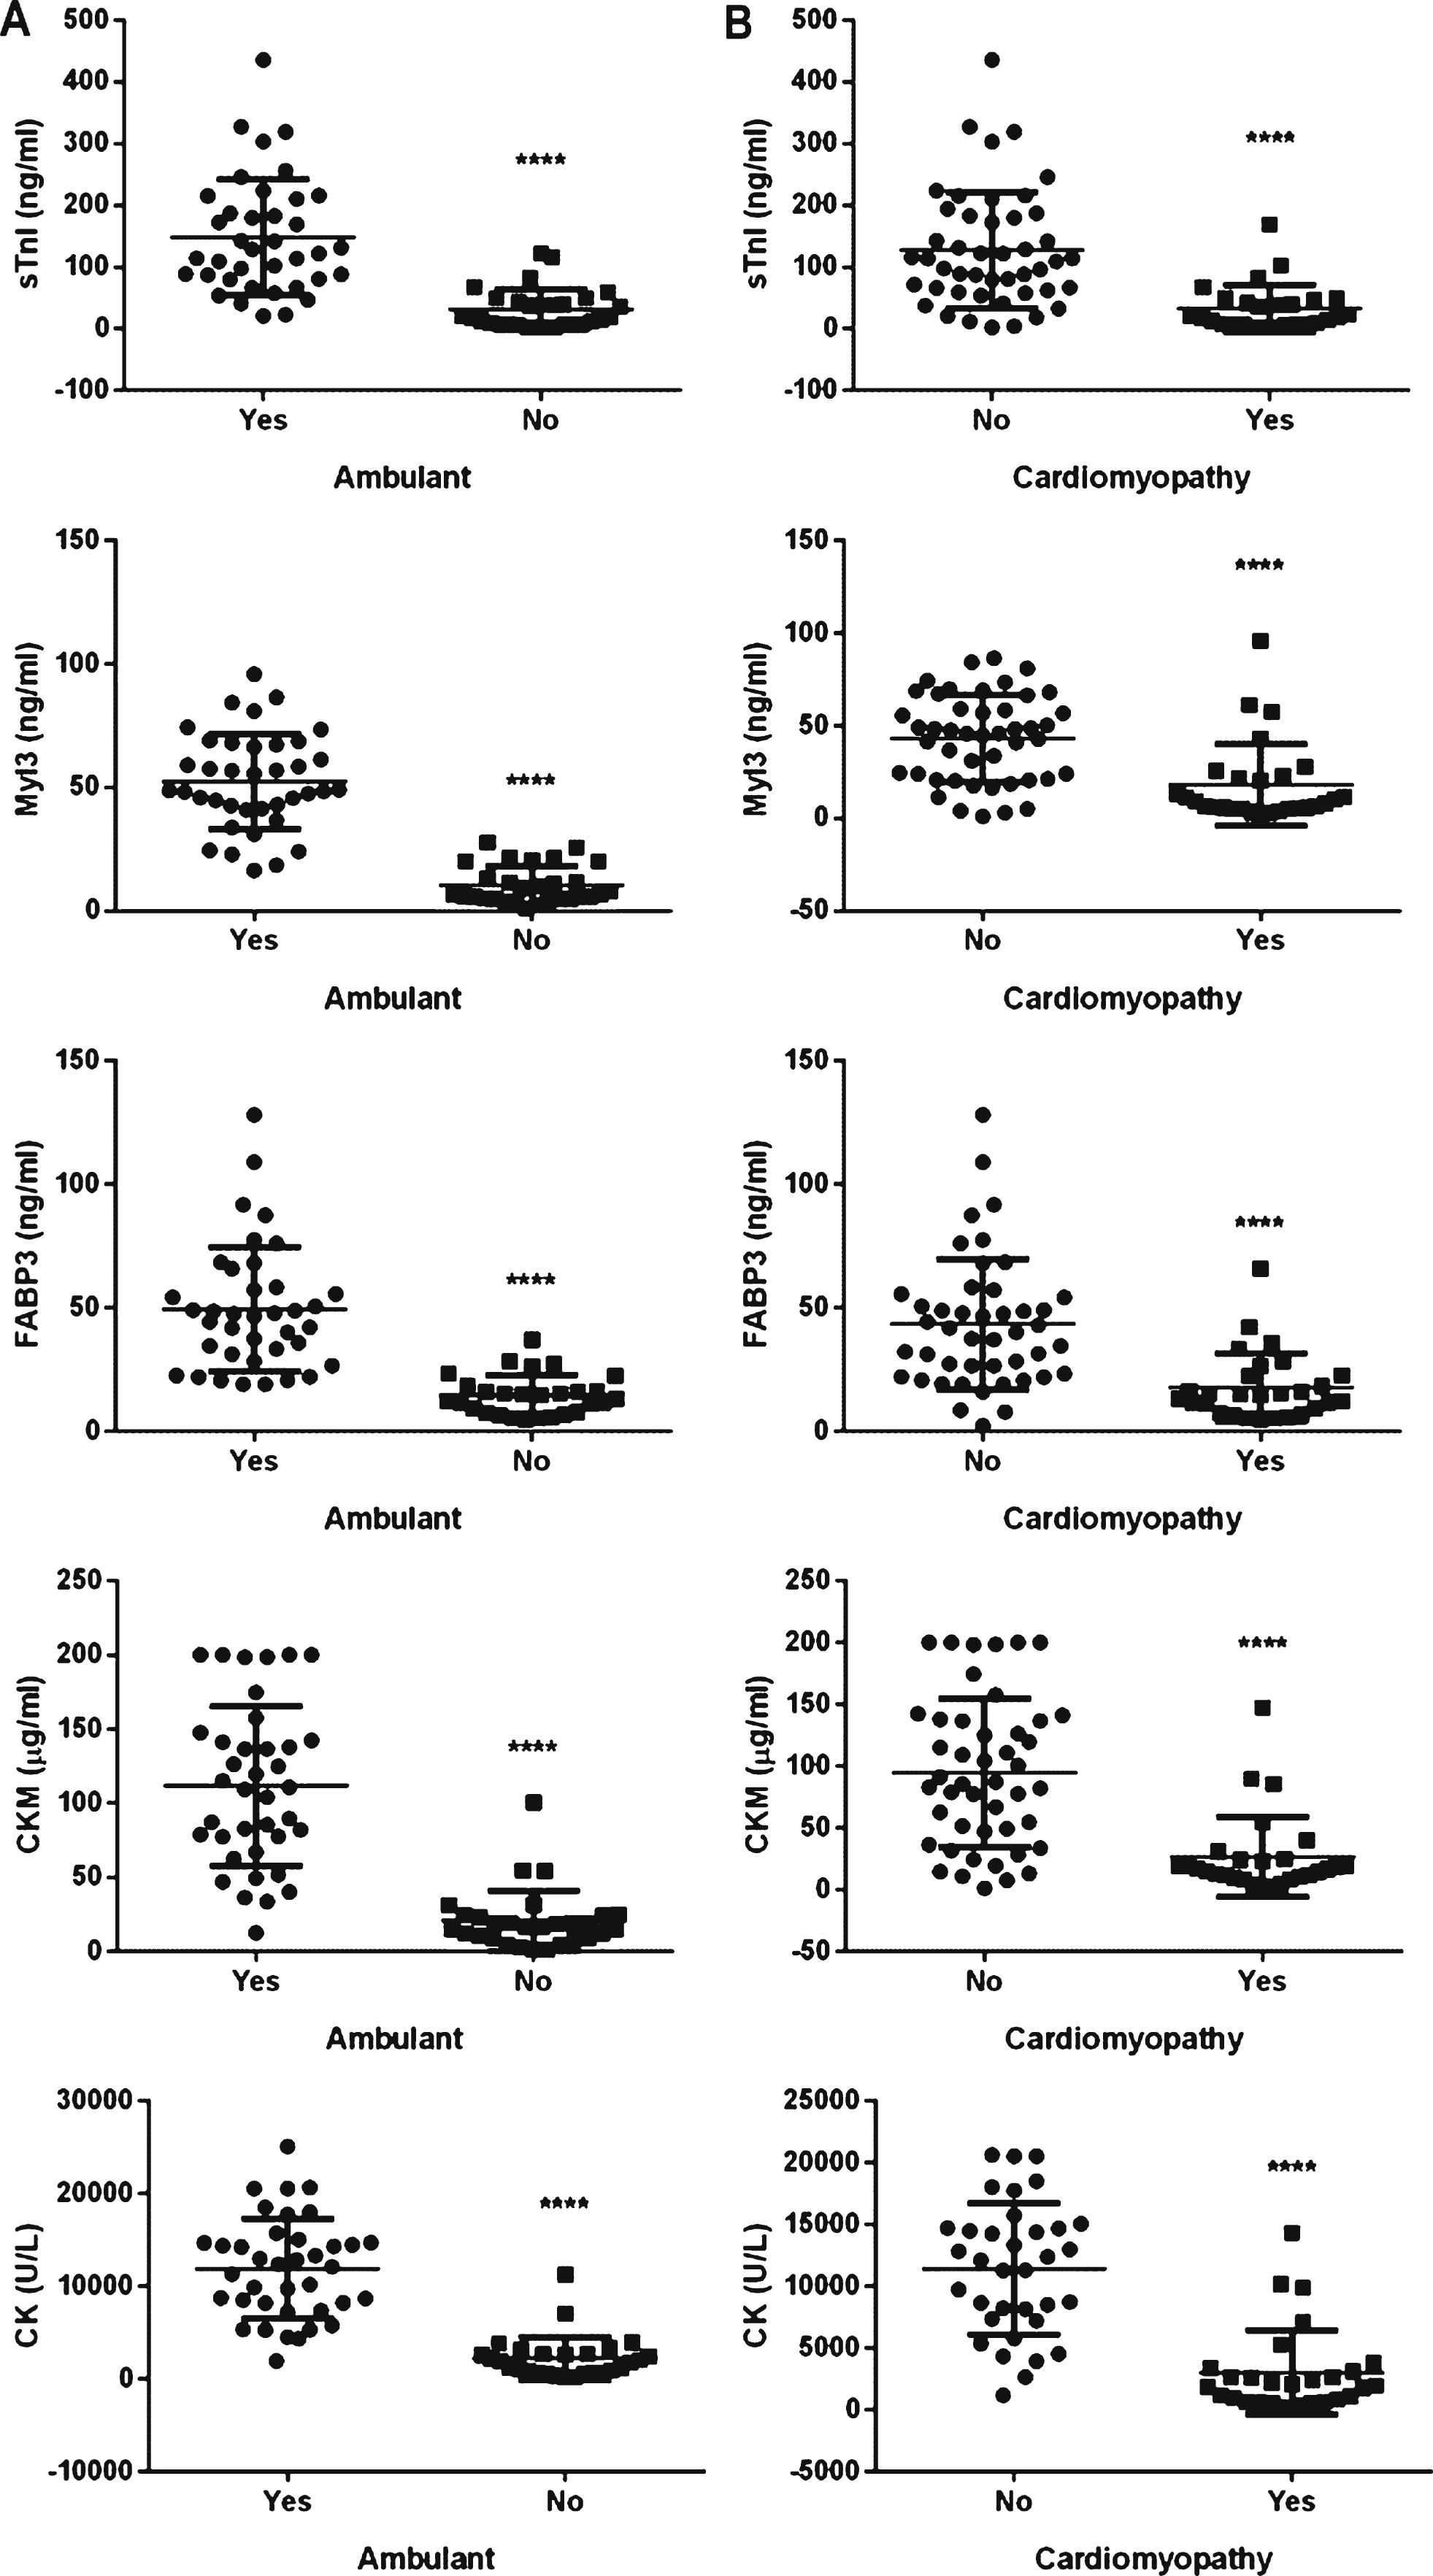 Scatter plots of the protein serum concentrations in DMD patients based on clinical status. Serum concentrations of sTnI, Myl3, FABP3, CKM and total CK in (A) ambulant (N = 46) and non-ambulant (N = 29) DMD patients or (B) those classified as with (N = 25) and without (N = 50) cardiomyopathy are shown. The line and error bars represent the mean and standard deviation of each group.  ****
P <  0.0001.